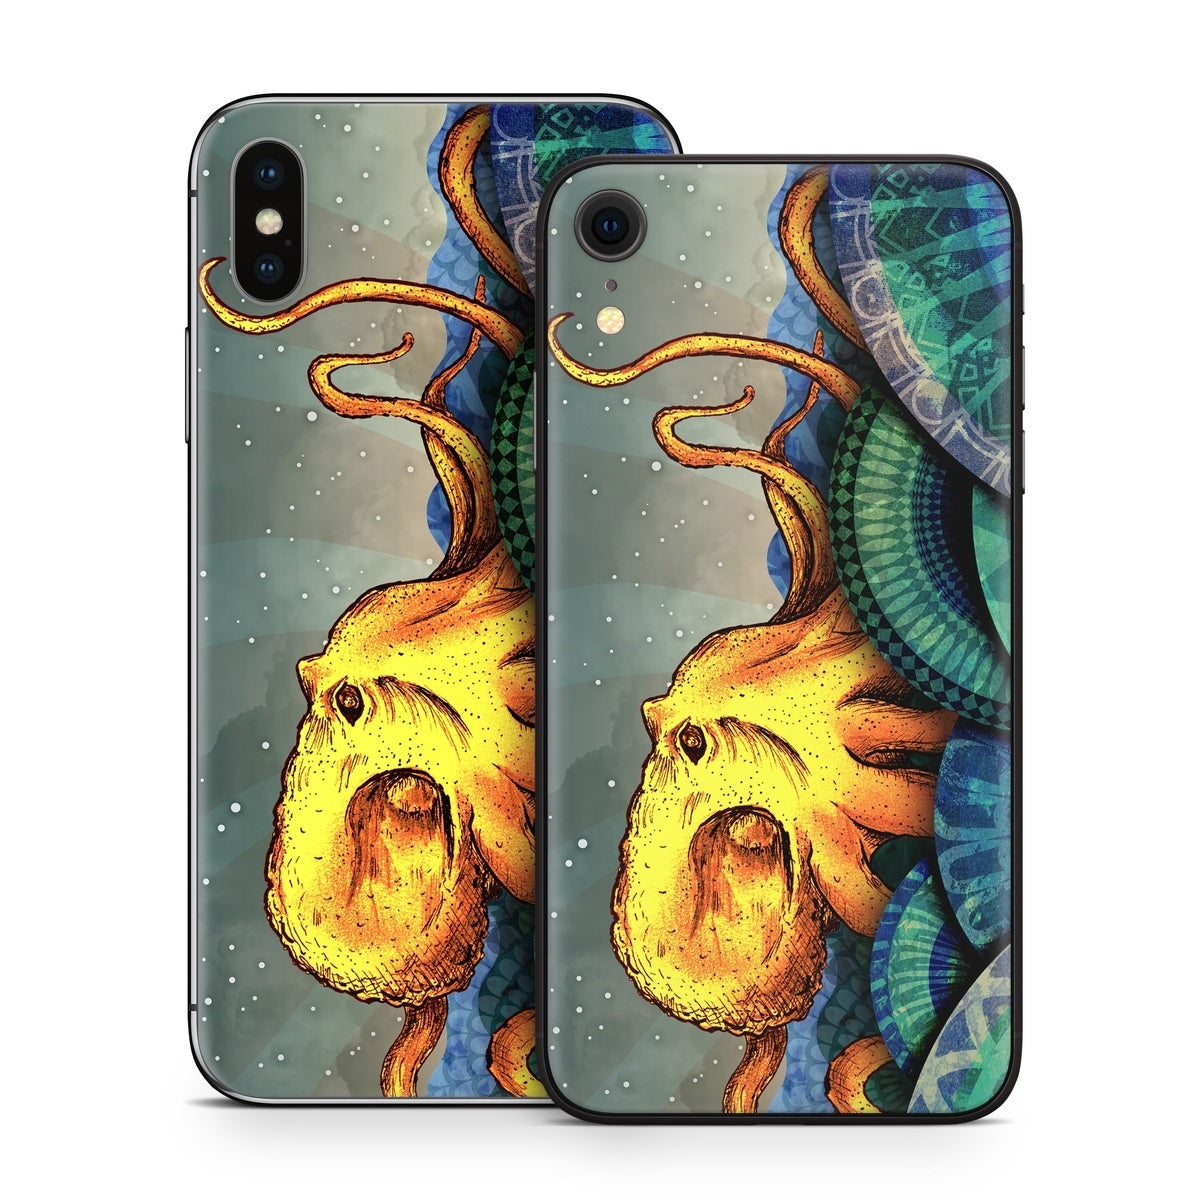 From the Deep - Apple iPhone X Skin